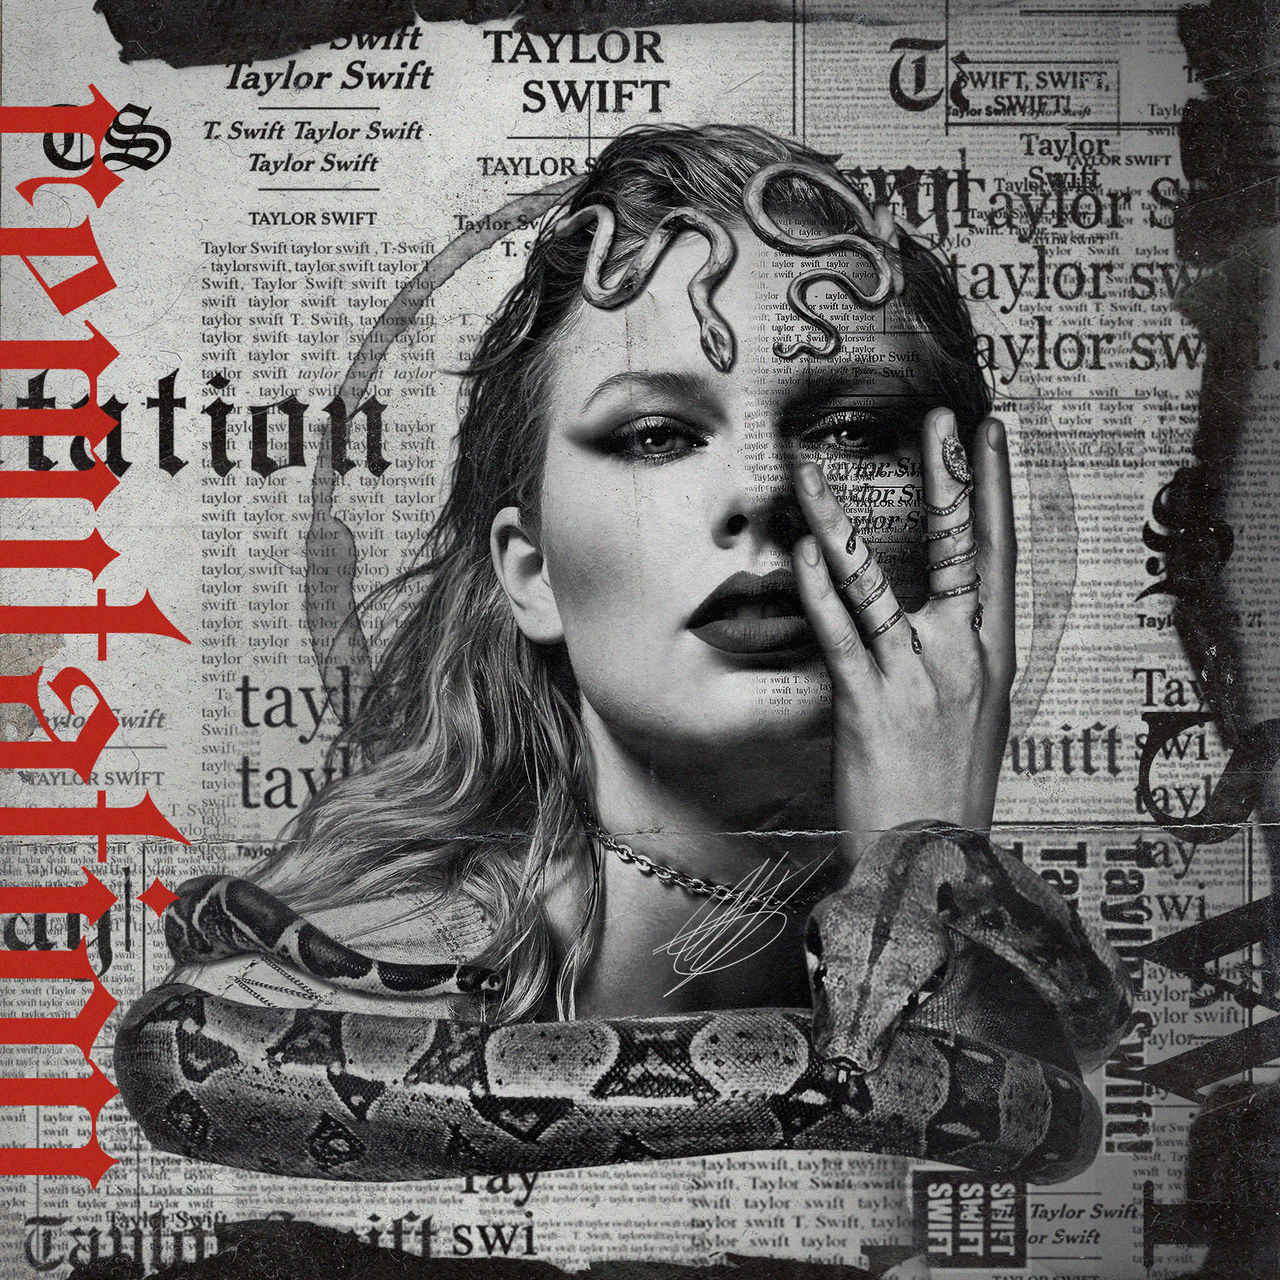 Taylor Swift - Reputation by GOLDENDesignCover on DeviantArt